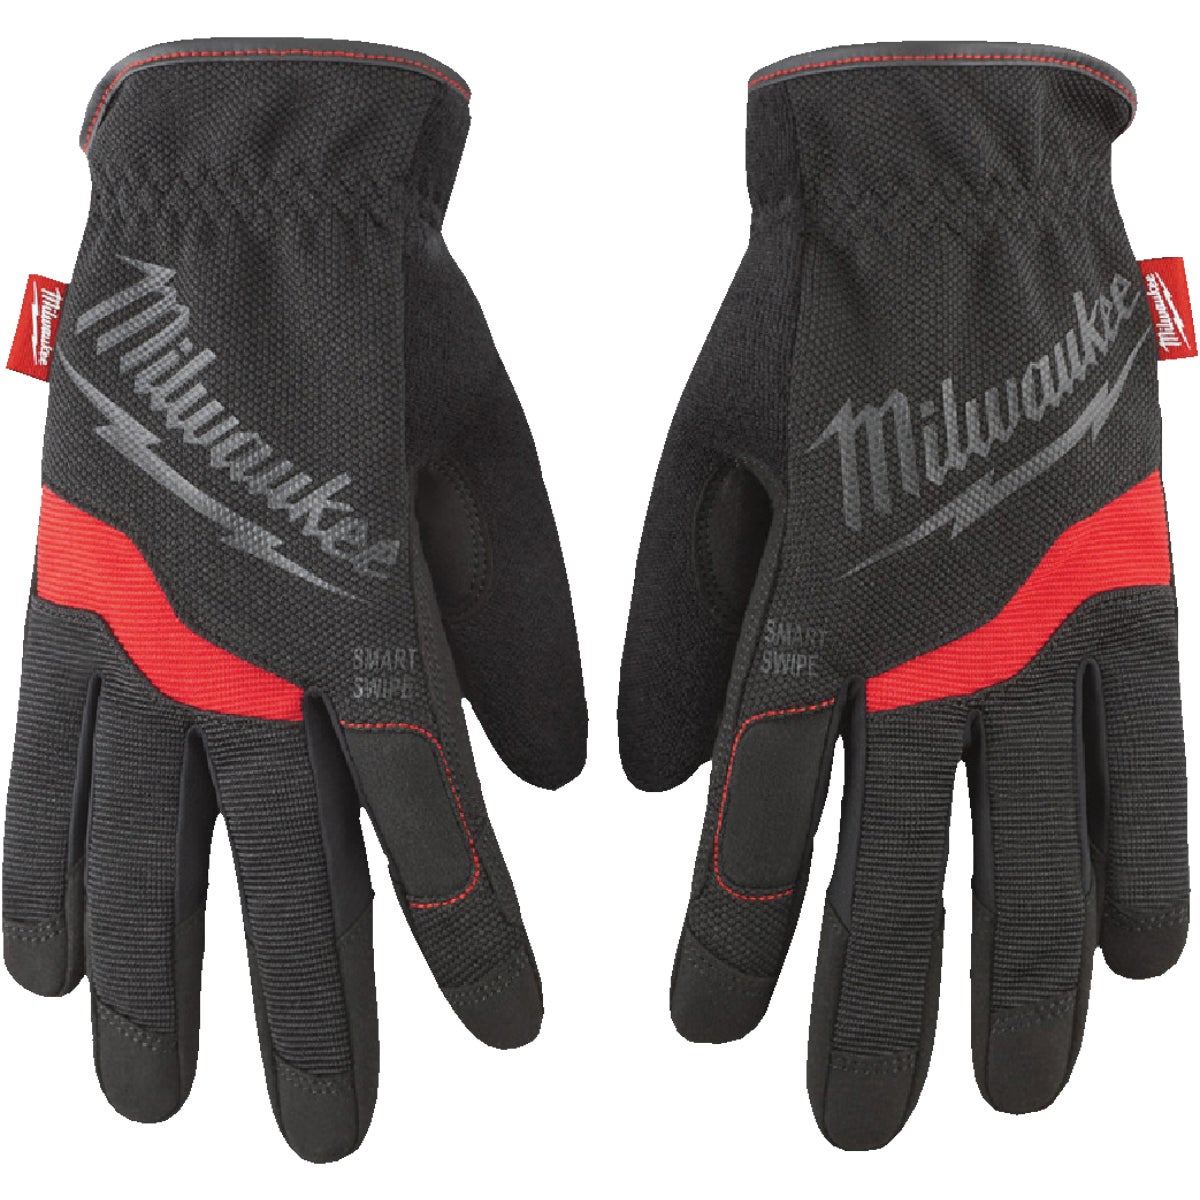 Item 705343, Durable work gloves designed to provide ultimate durability and all day 